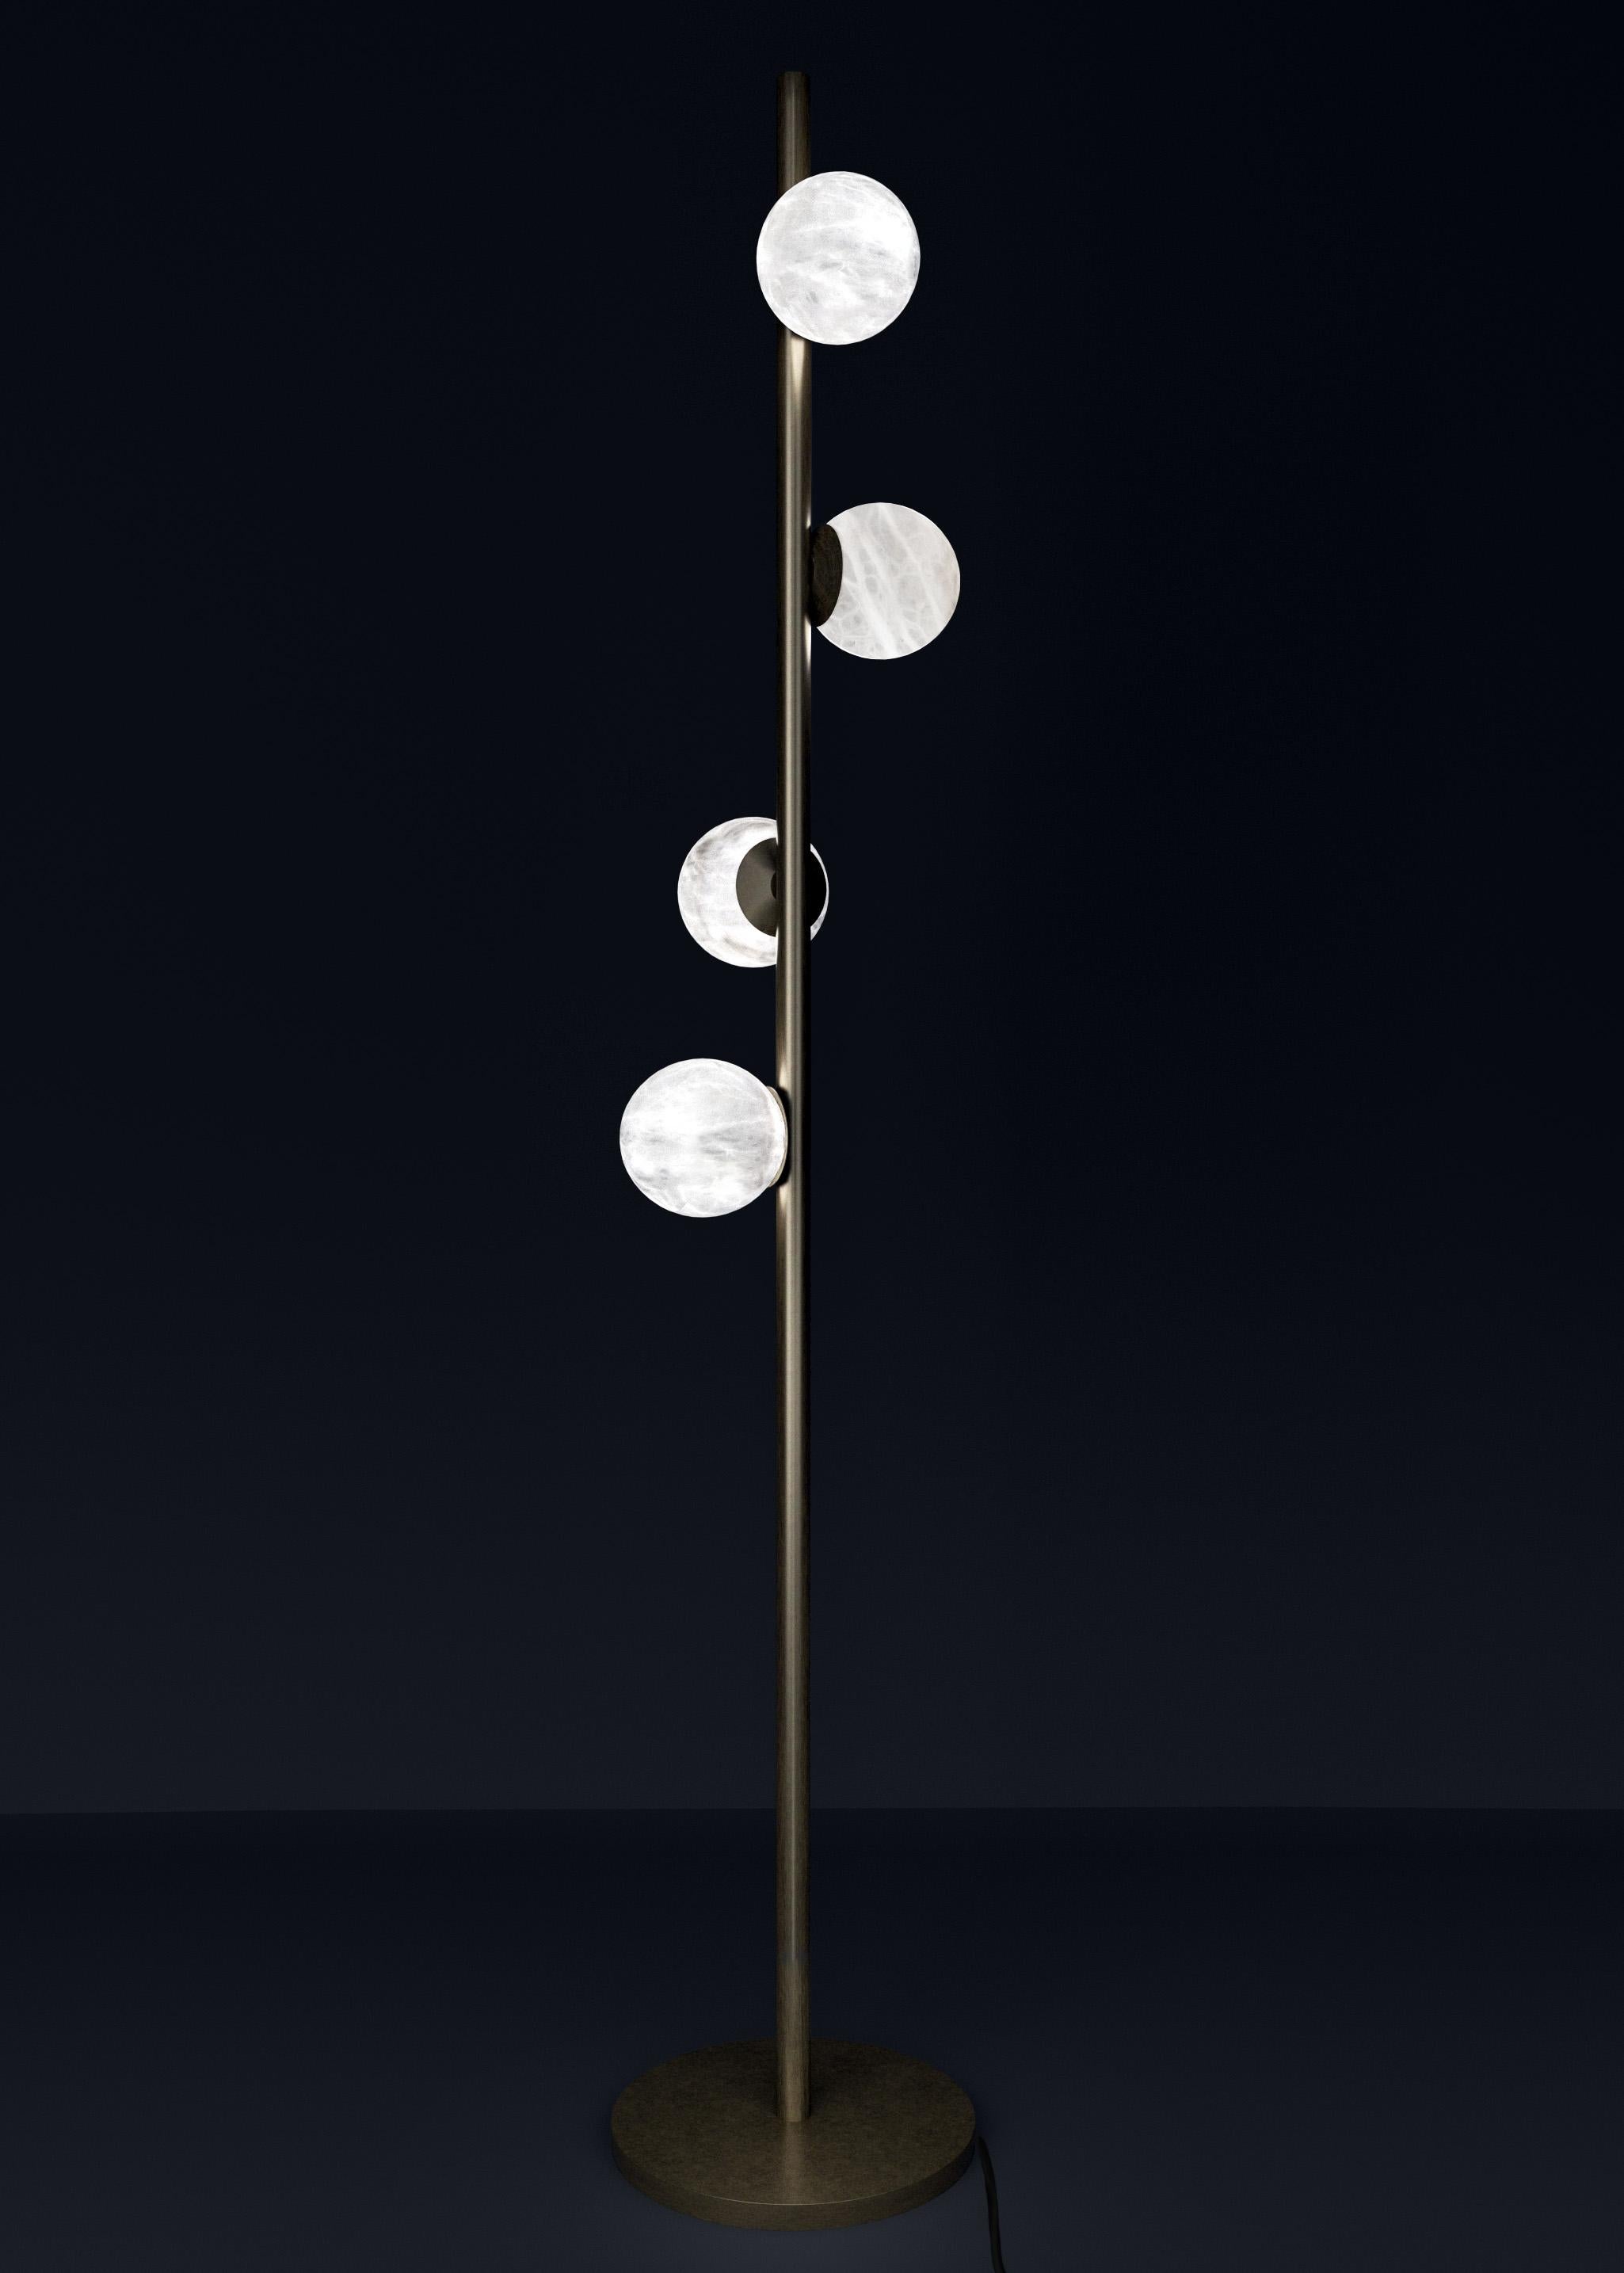 Ofione Brushed Burnished Metal Floor Lamp by Alabastro Italiano
Dimensions: D 50 x W 50 x H 170 cm.
Materials: White alabaster and metal.

Available in different finishes: Shiny Silver, Bronze, Brushed Brass, Matte Black, Ruggine of Florence,